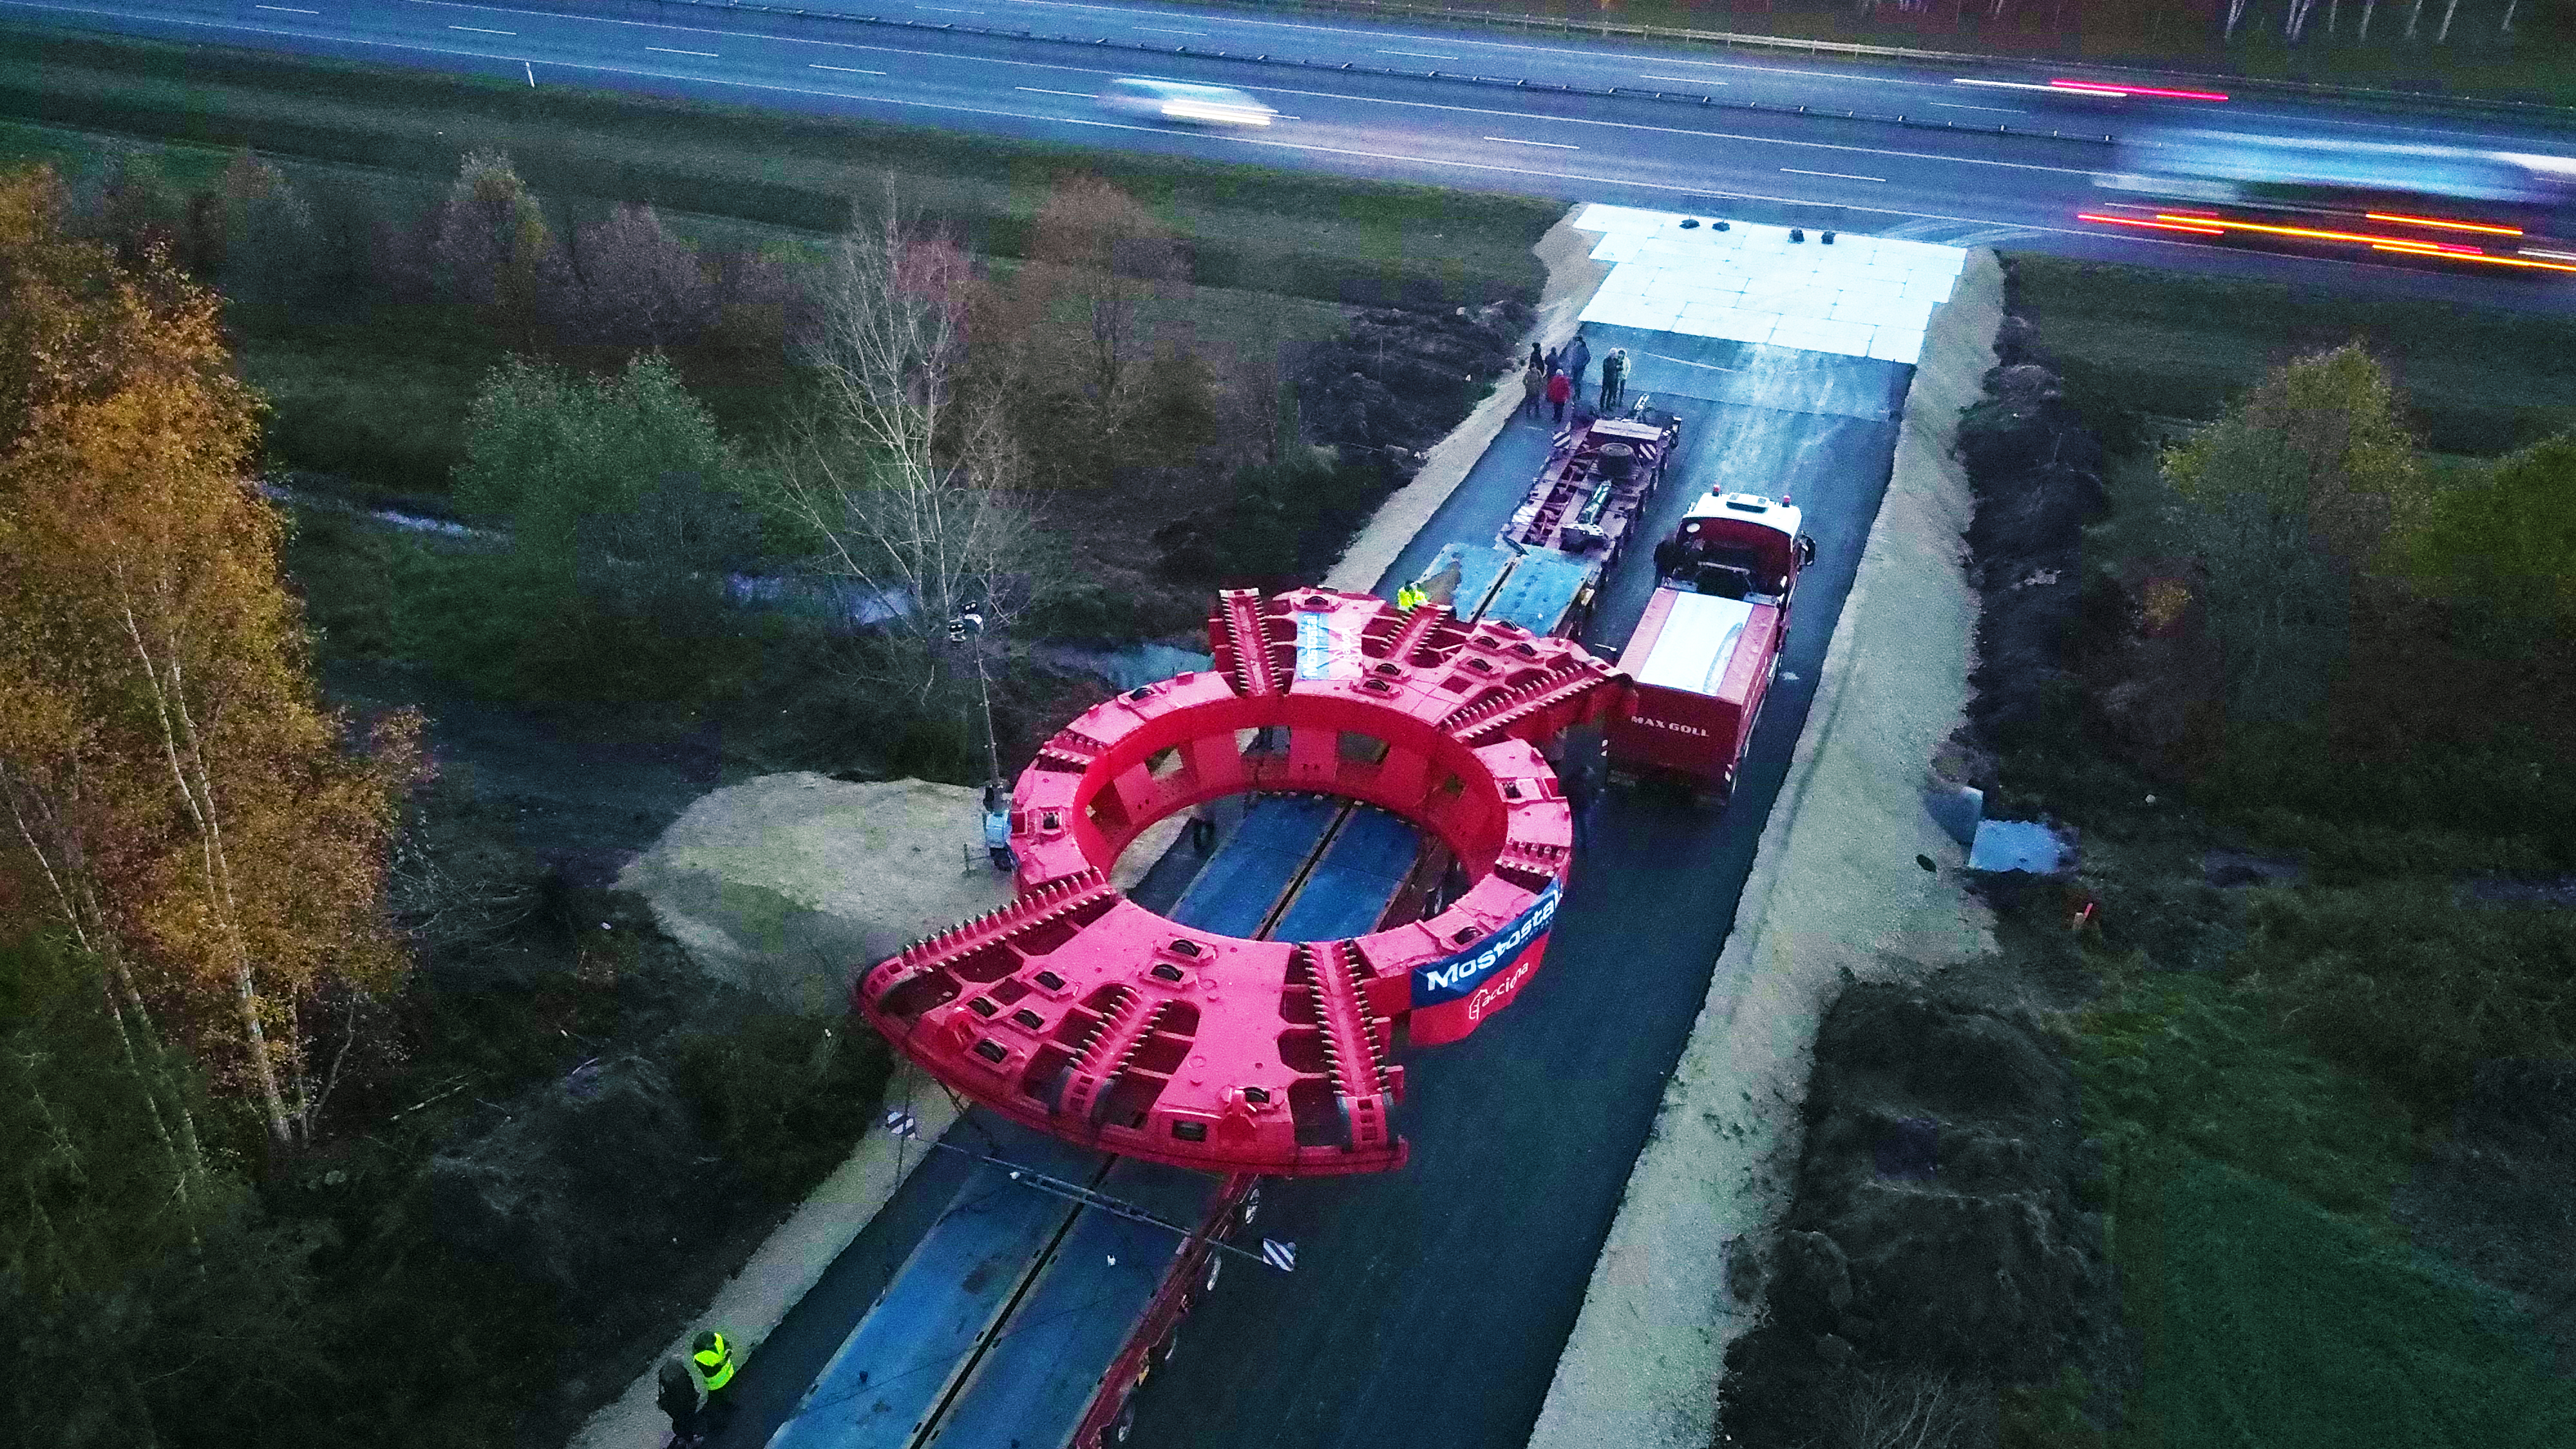 Temporary road for abnormal load - A2 to DW424 image